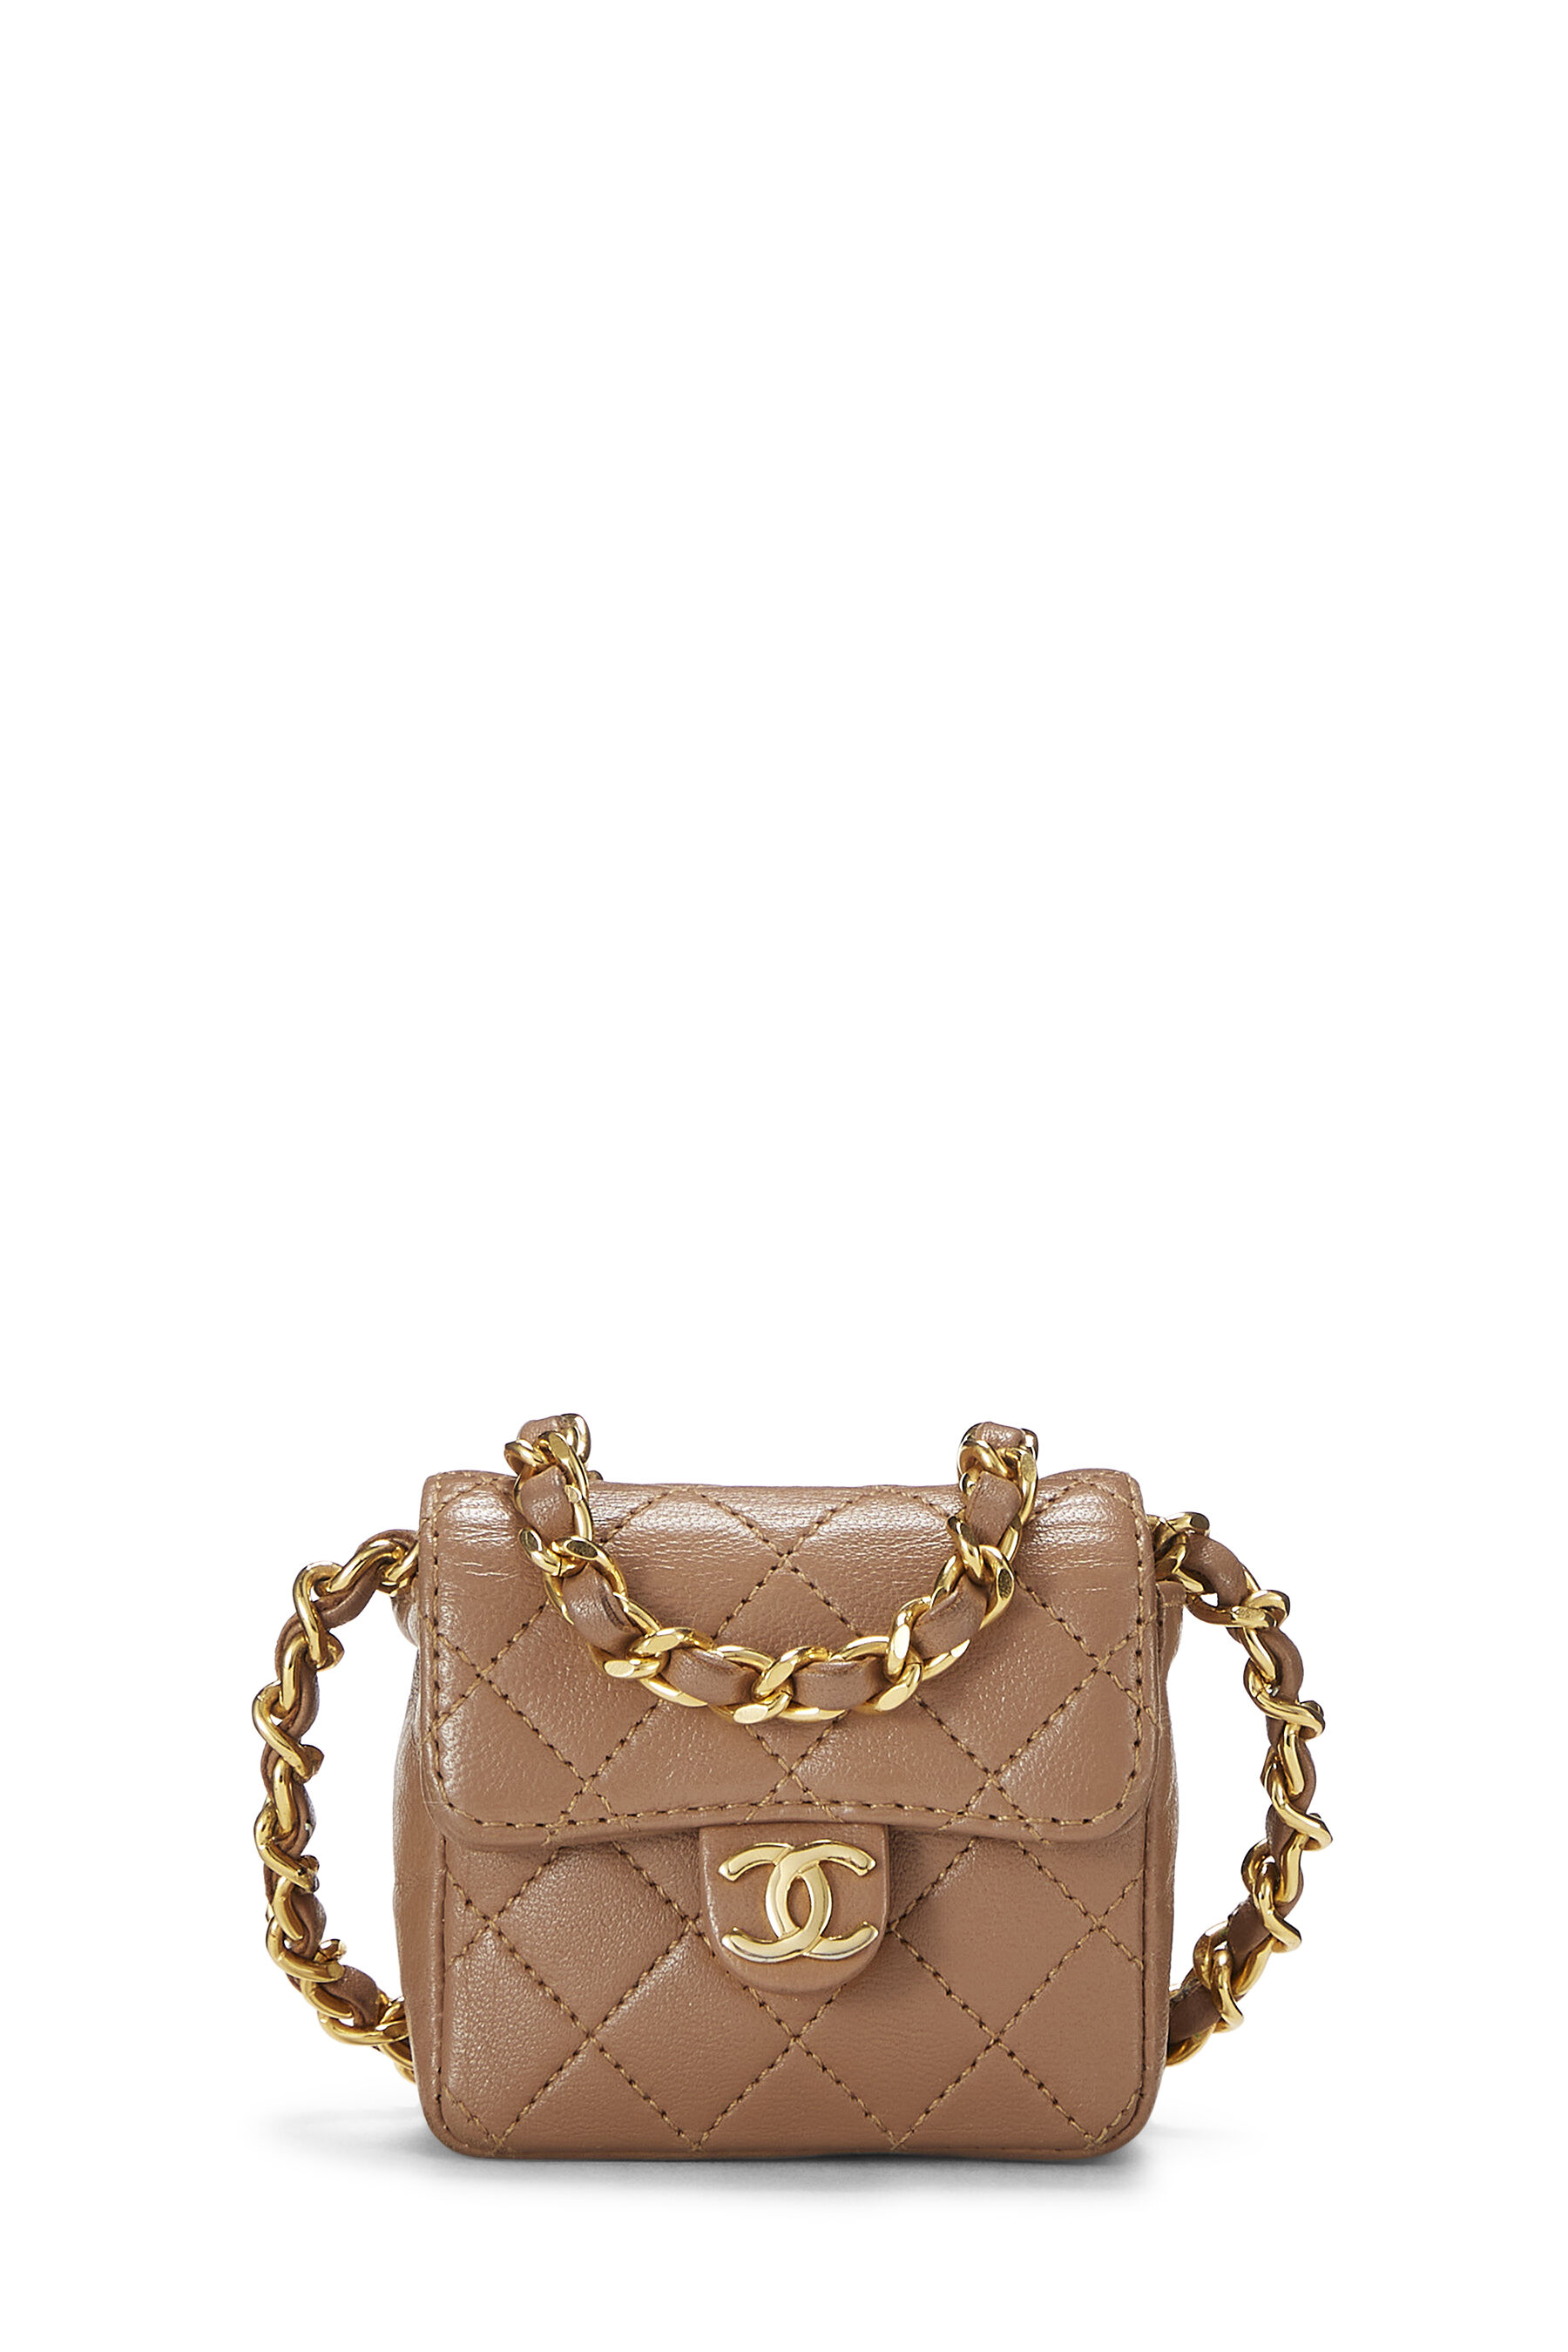 Chanel - Beige Quilted Lambskin Half Flap Micro